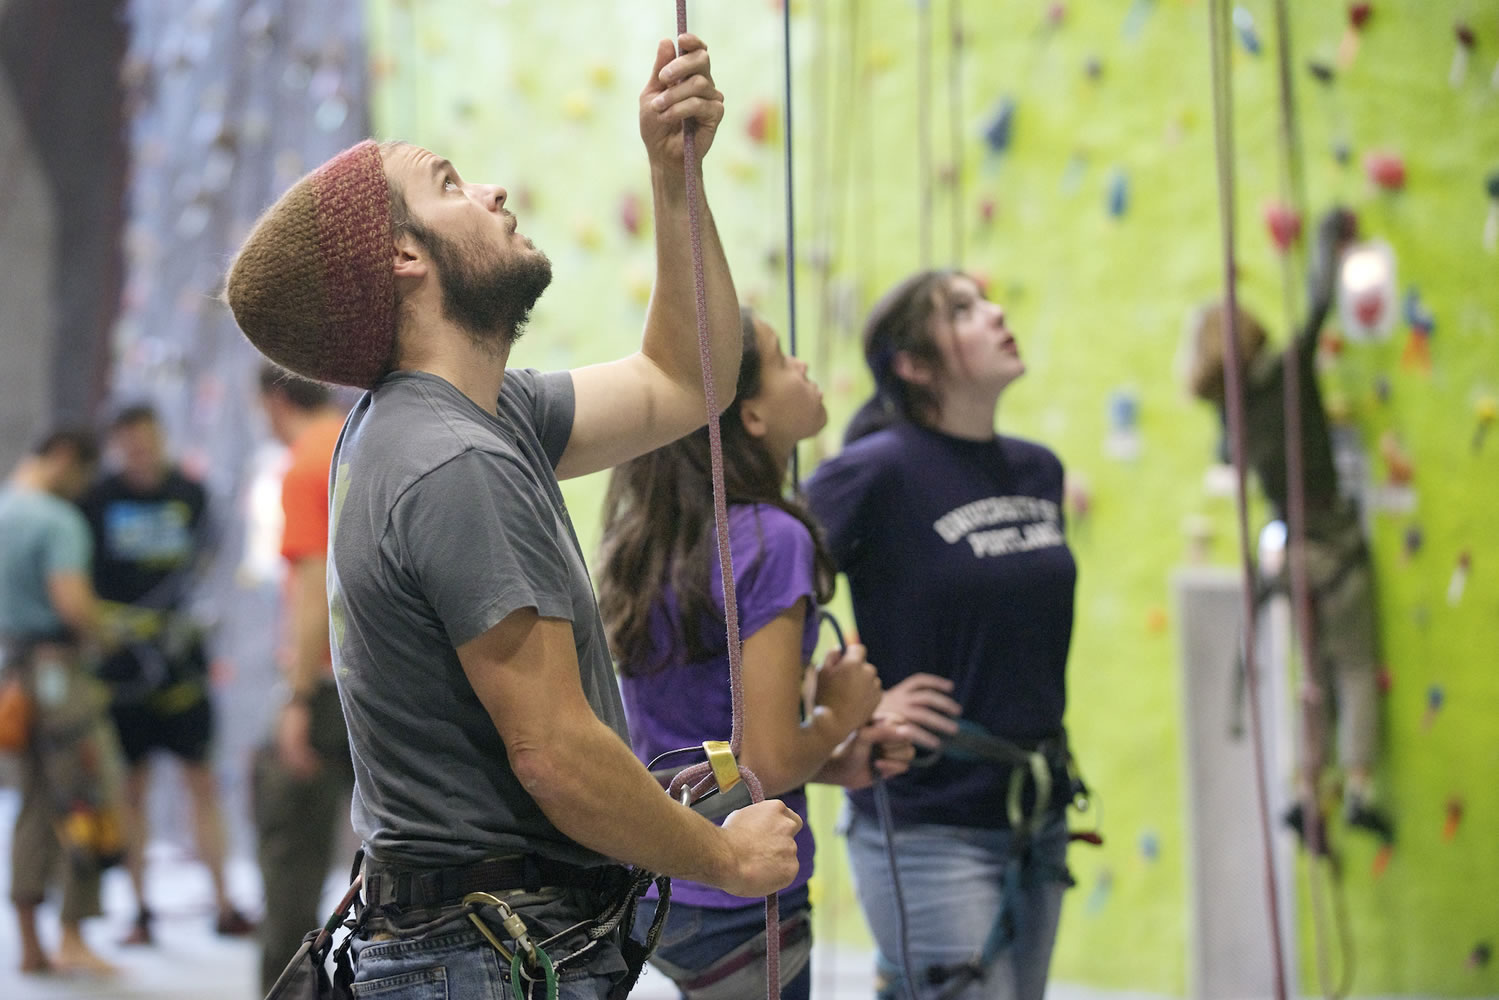 Bryan Caldwell, a climbing instructor at The Source Climbing Center, belays as a student climbs a wall during a class in October.